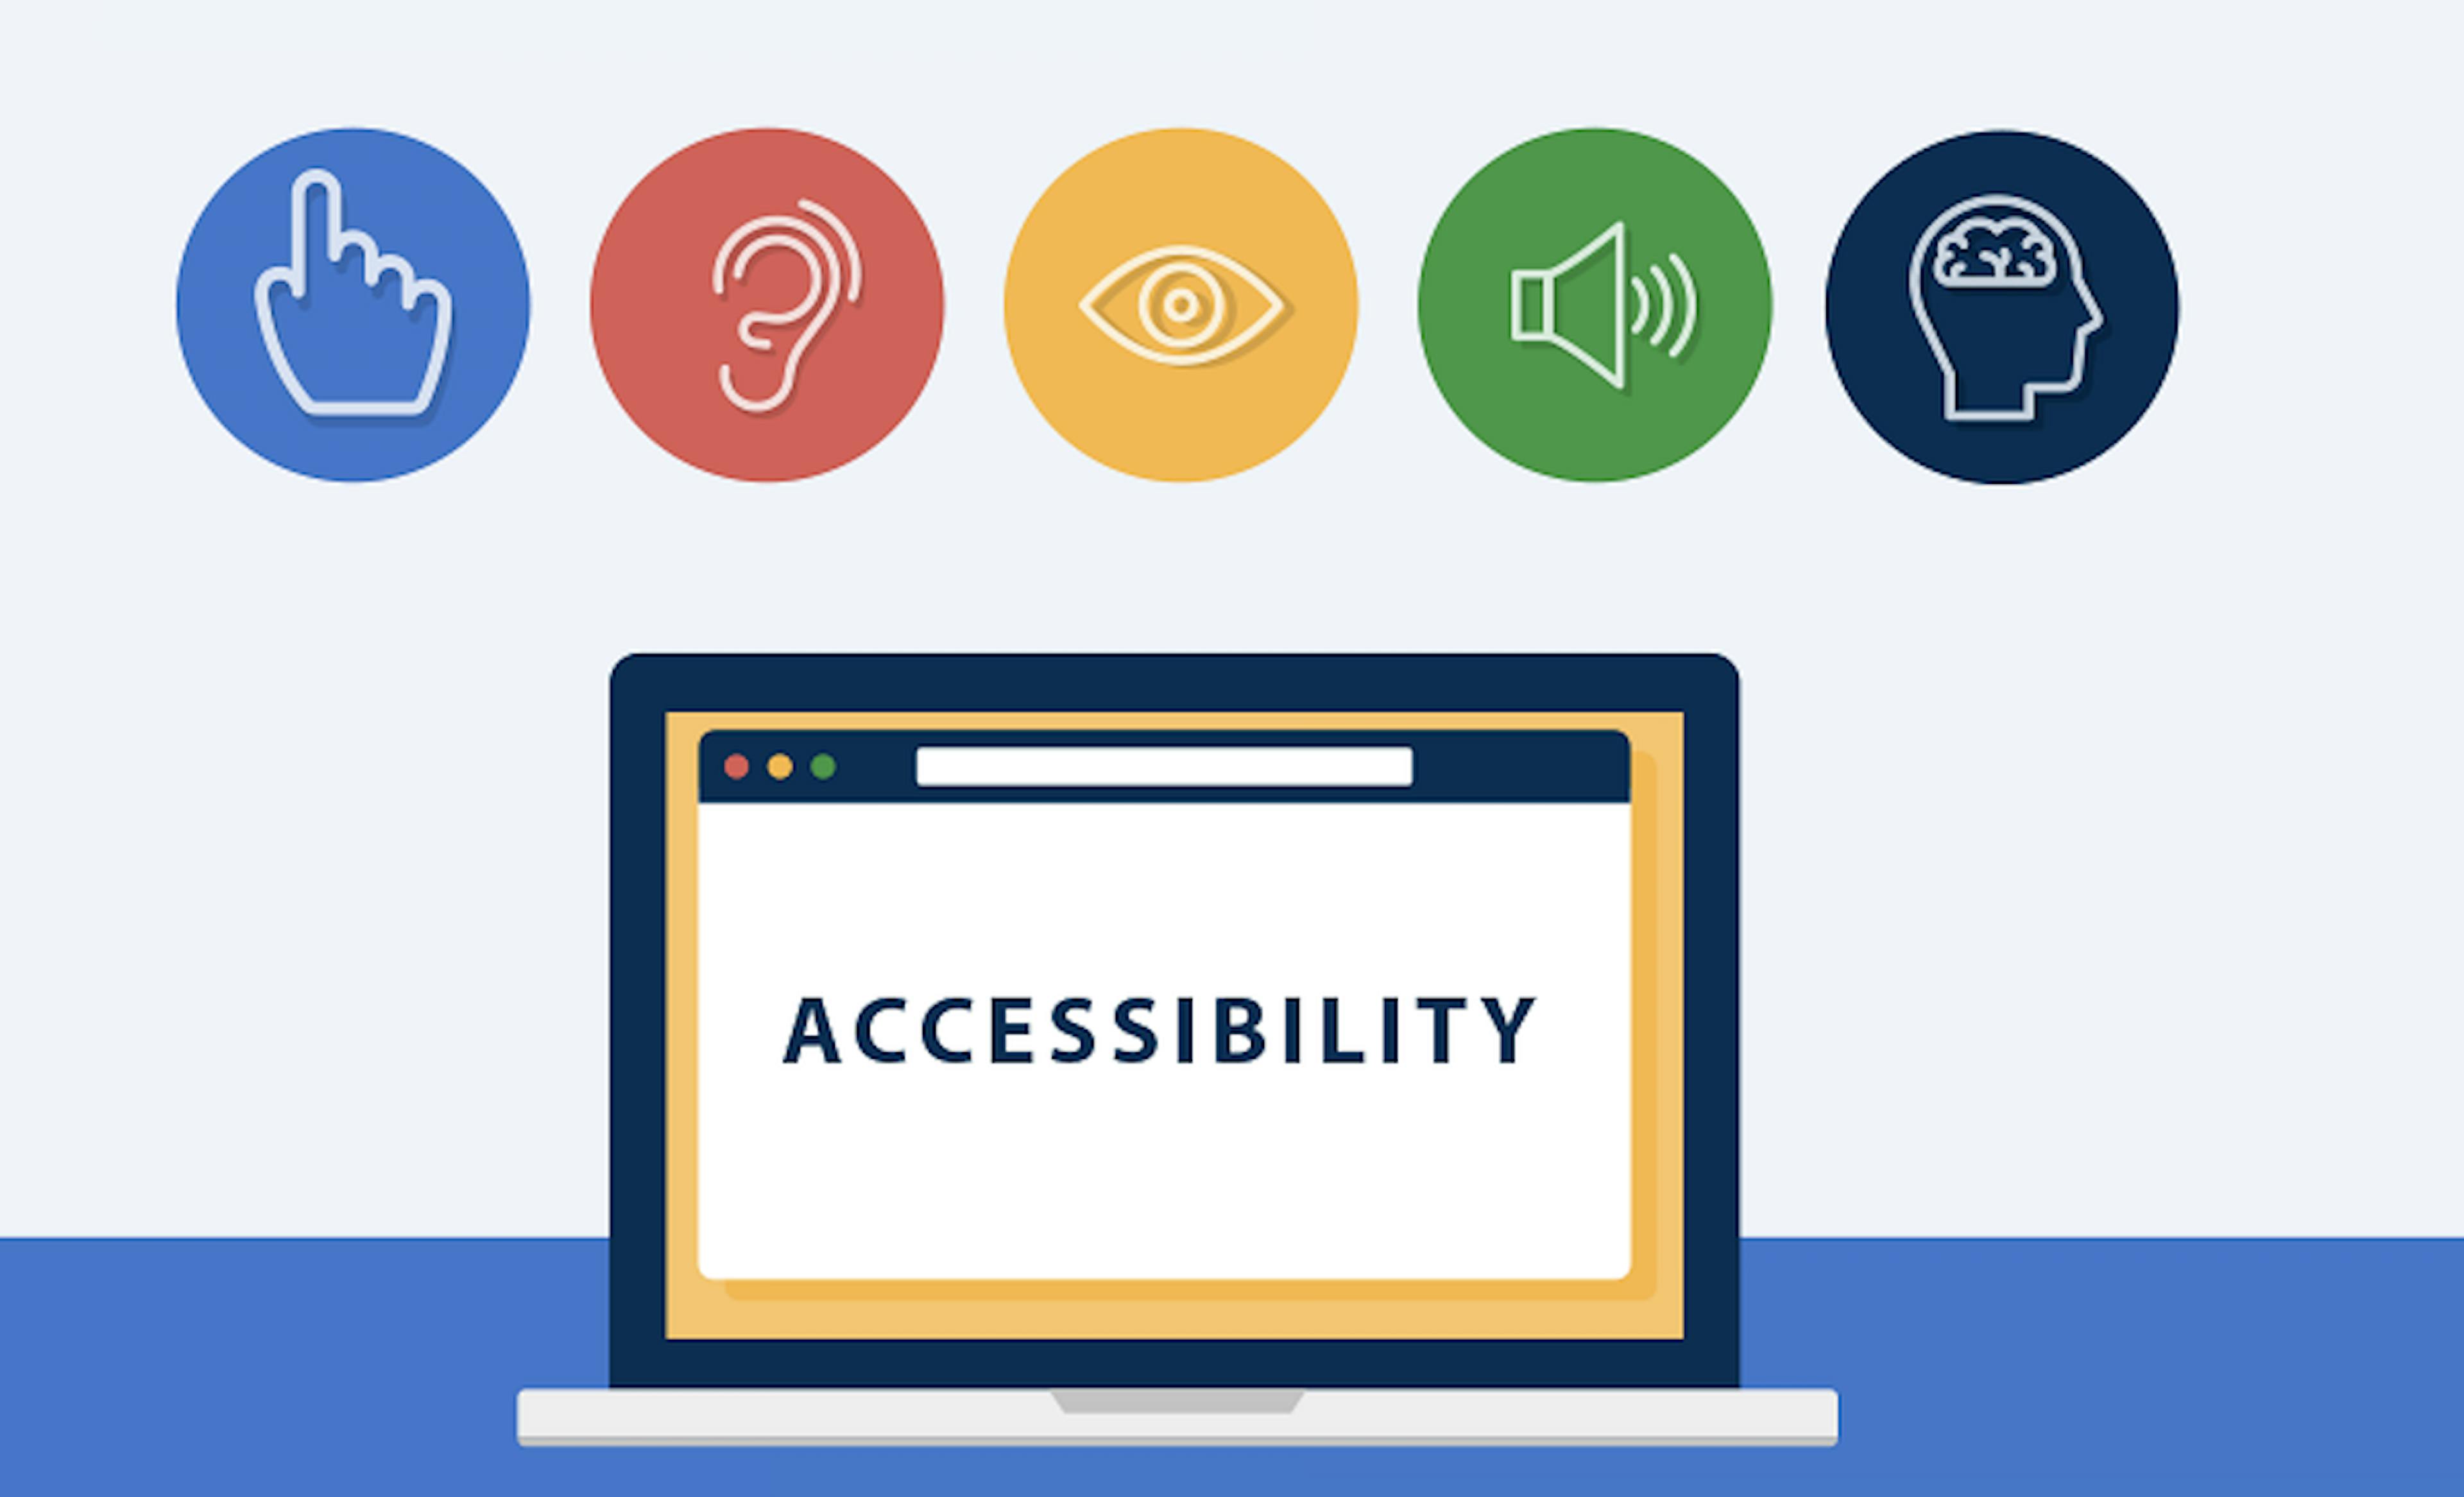 Accessibility and Convenience